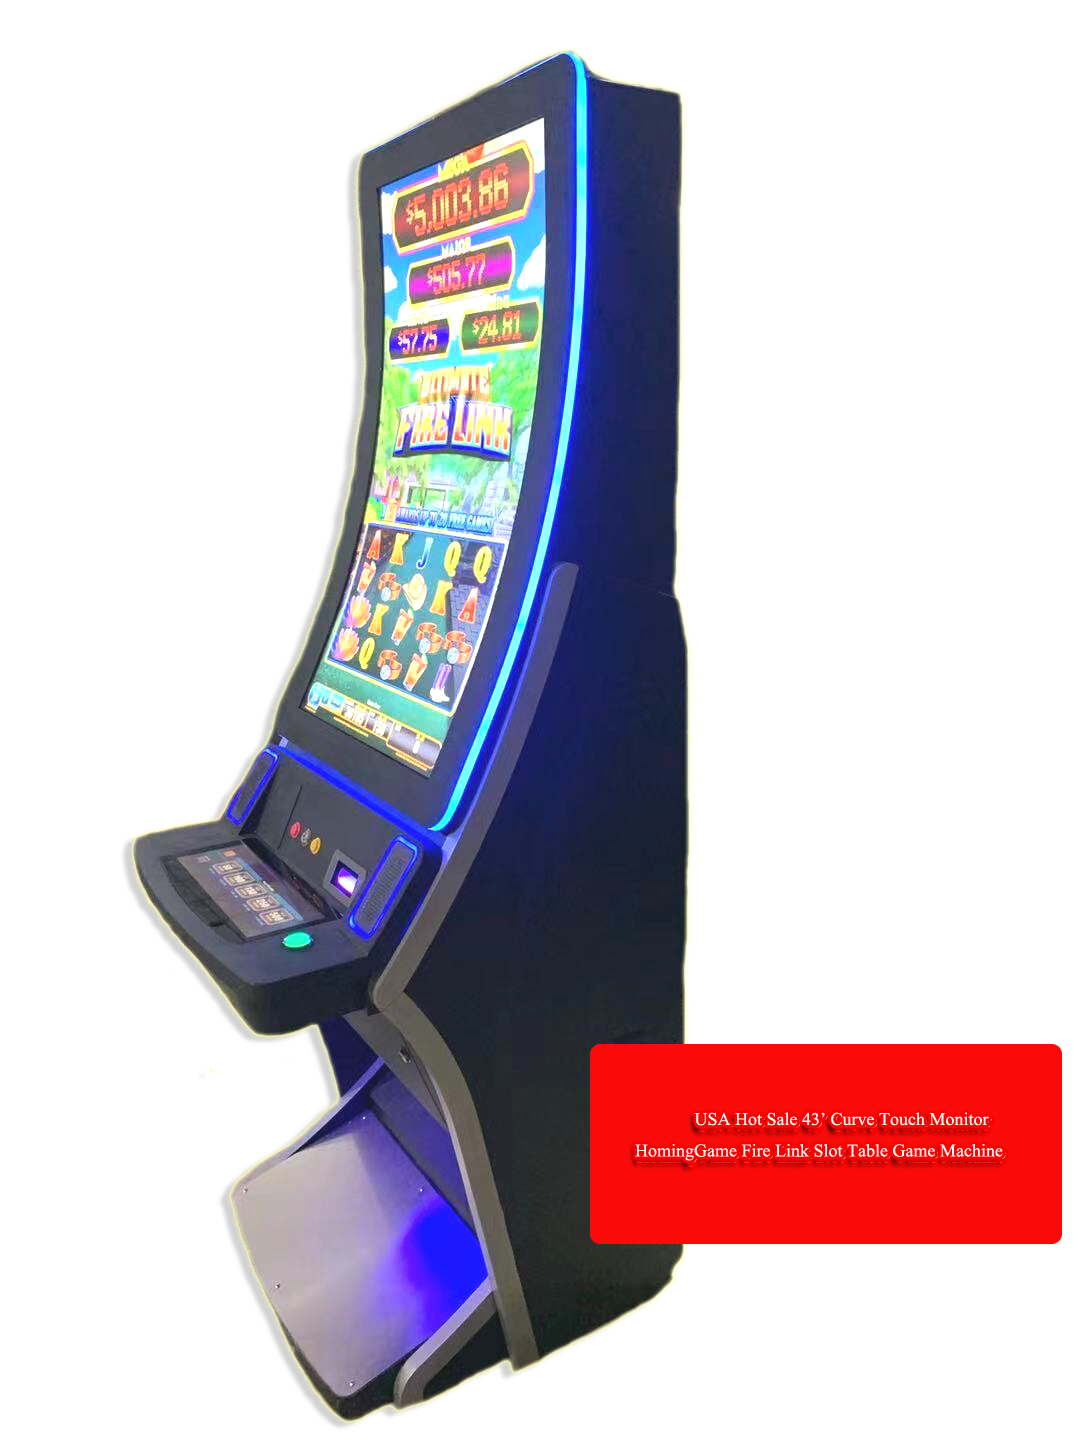 2021 HomingGame Top Sale USA 43' Touch Curve Monitor 8 in 1 Fire Link Slot Table Game Machine With Touch console(Order Call Whatsapp:+8618688409495),43' touch curve monitor 8 in 1 fire link slot table game machine,8 in 1 fire link slot game machine,slot table game machine,43' touch screen fire link slot game machine,43' touch monitor fire link slot table game machine,43' curve touch monitor fire link slot gaming machine,dragon link slot game machine,panda link slot game machine,golden buffalo slot game machine,fusion 4 slot game machine,ultimate fire link,ultimate fire link slot game machine,ultimate fire link slot game,fire link slot game machine,fire link,ultimate fire link slot gaming machine,ultimate fire link slot table gaming machine,slot game,slot table game,slot gaming machine,game machine,arcade game machine,coin operated game machine,arcade game machine for sale,amsuement machine,entertainment game machine,family entertainment game machine,hominggame,www.gametube.hk,indoor game machine,casino,gambling machine,electrical game machine,slot,slot game machine for sale,slot table for sale,simulator game machine,video game machine,video game,video game machine for sale,hominggame fire link slot game,slot gaming